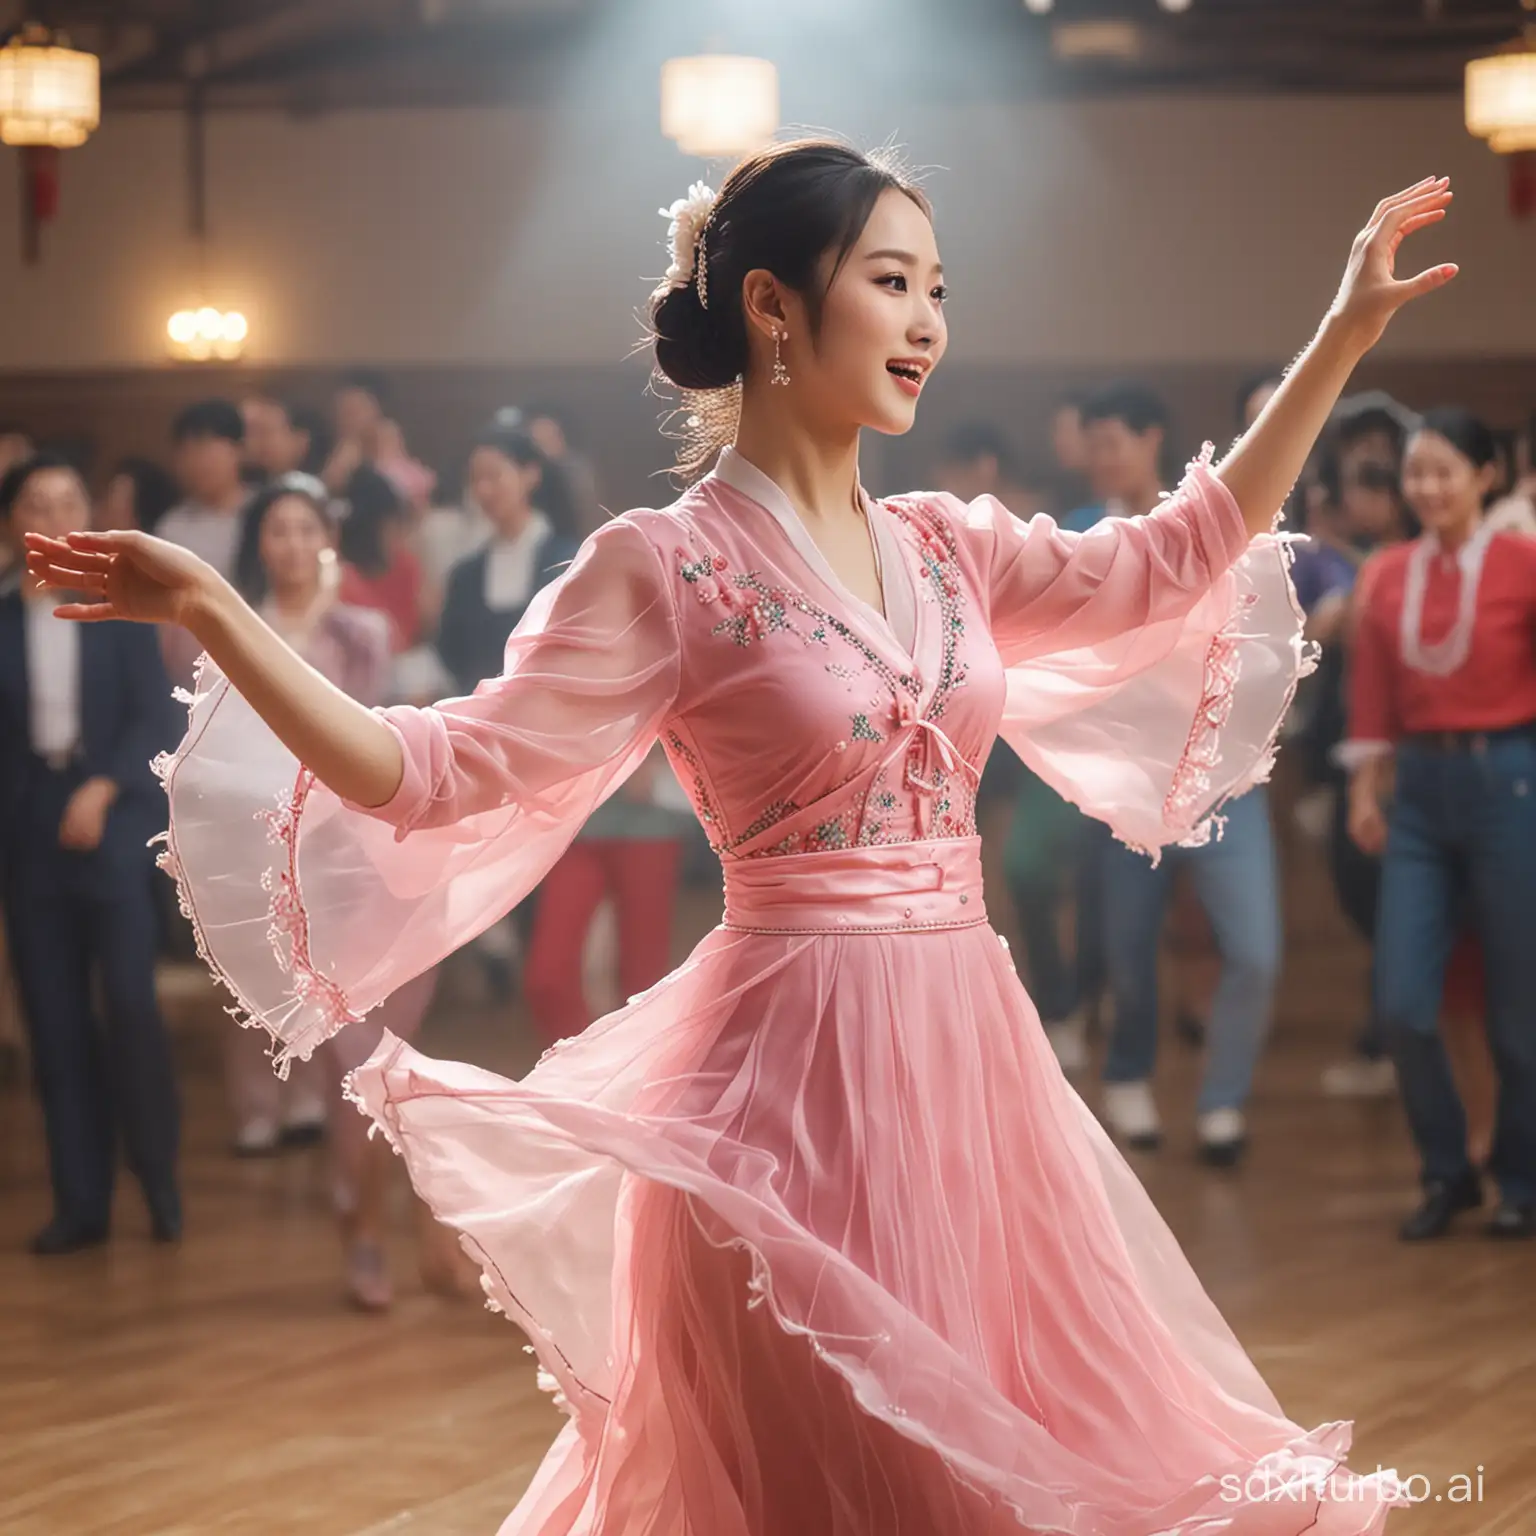 Chinese-Beauty-Dancing-Graceful-Square-Dance